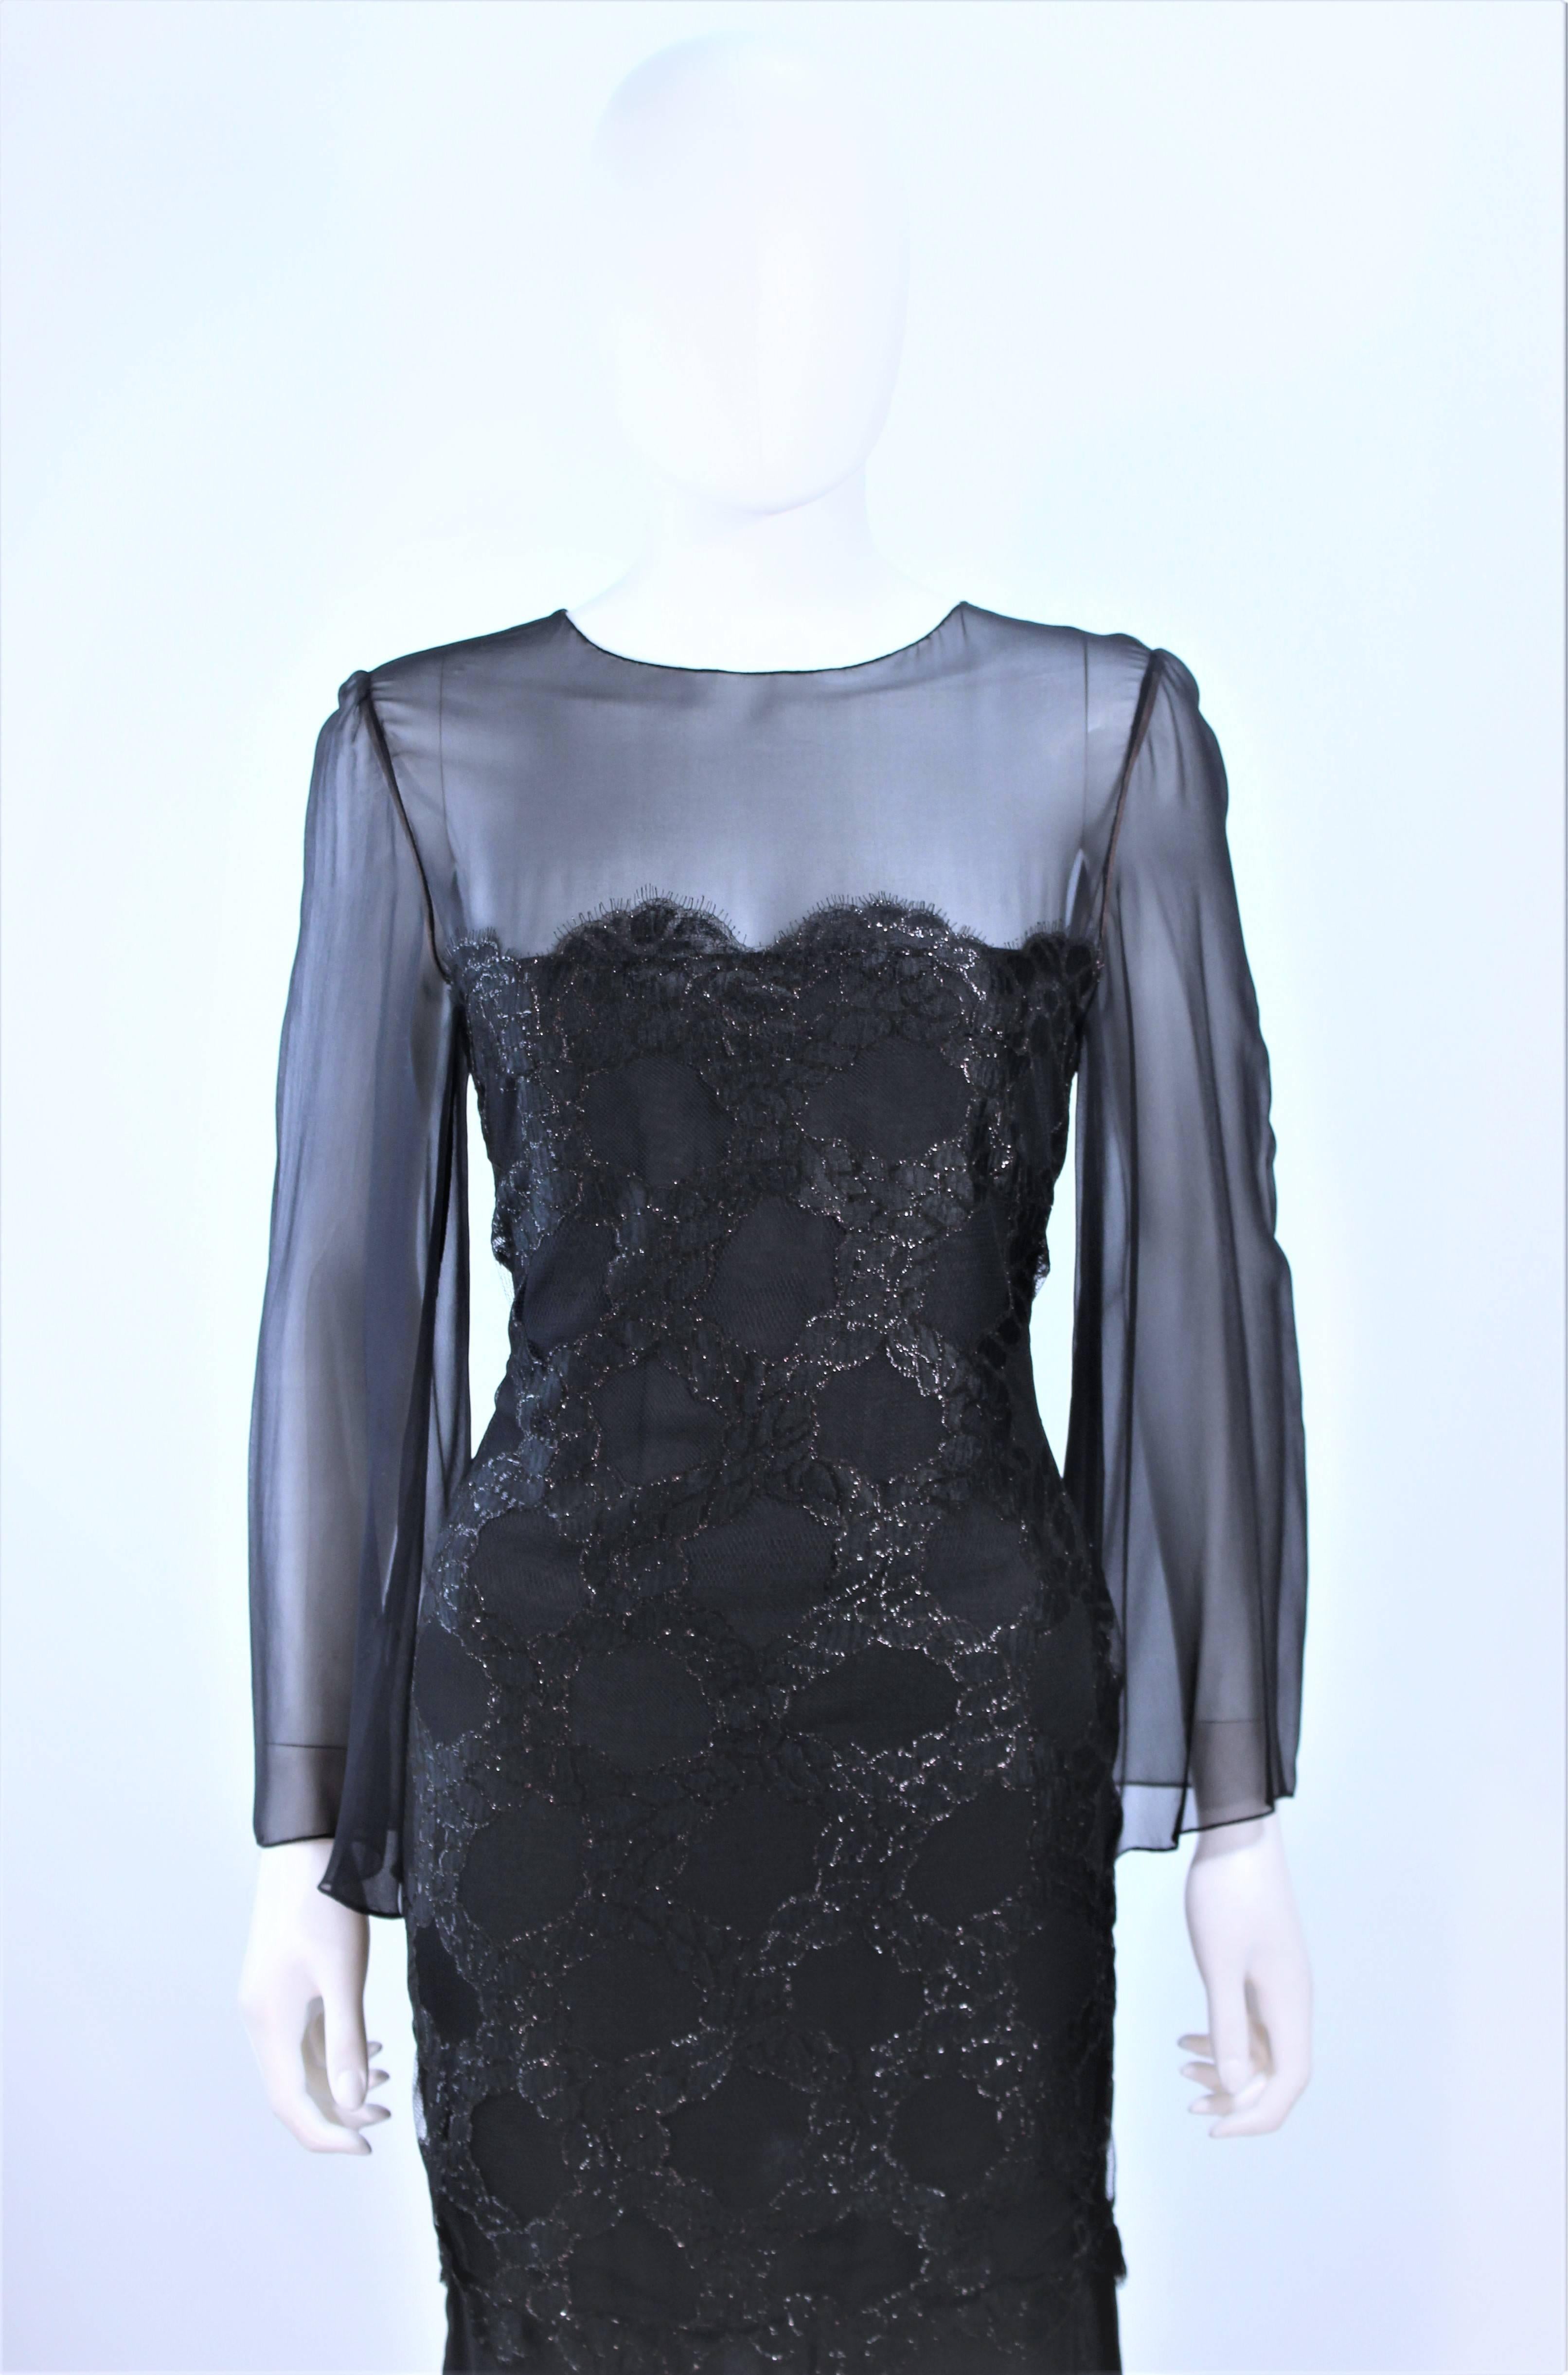 BILL BLASS Black Chiffon Gown with Gold Lame Bodice Size 12 In Excellent Condition For Sale In Los Angeles, CA